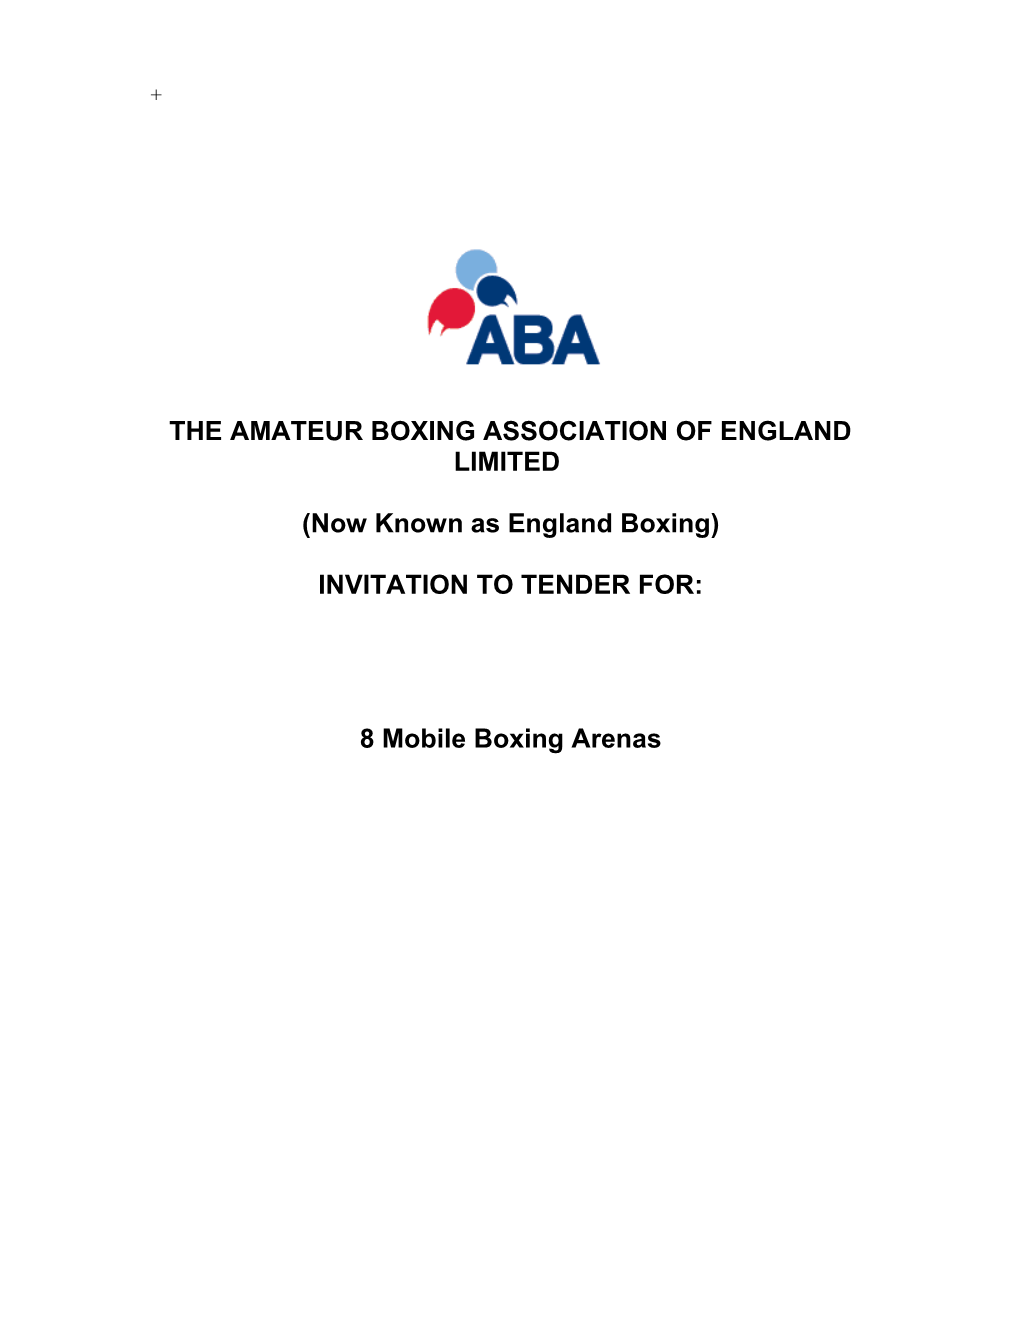 The Amateur Boxing Association of England Limited